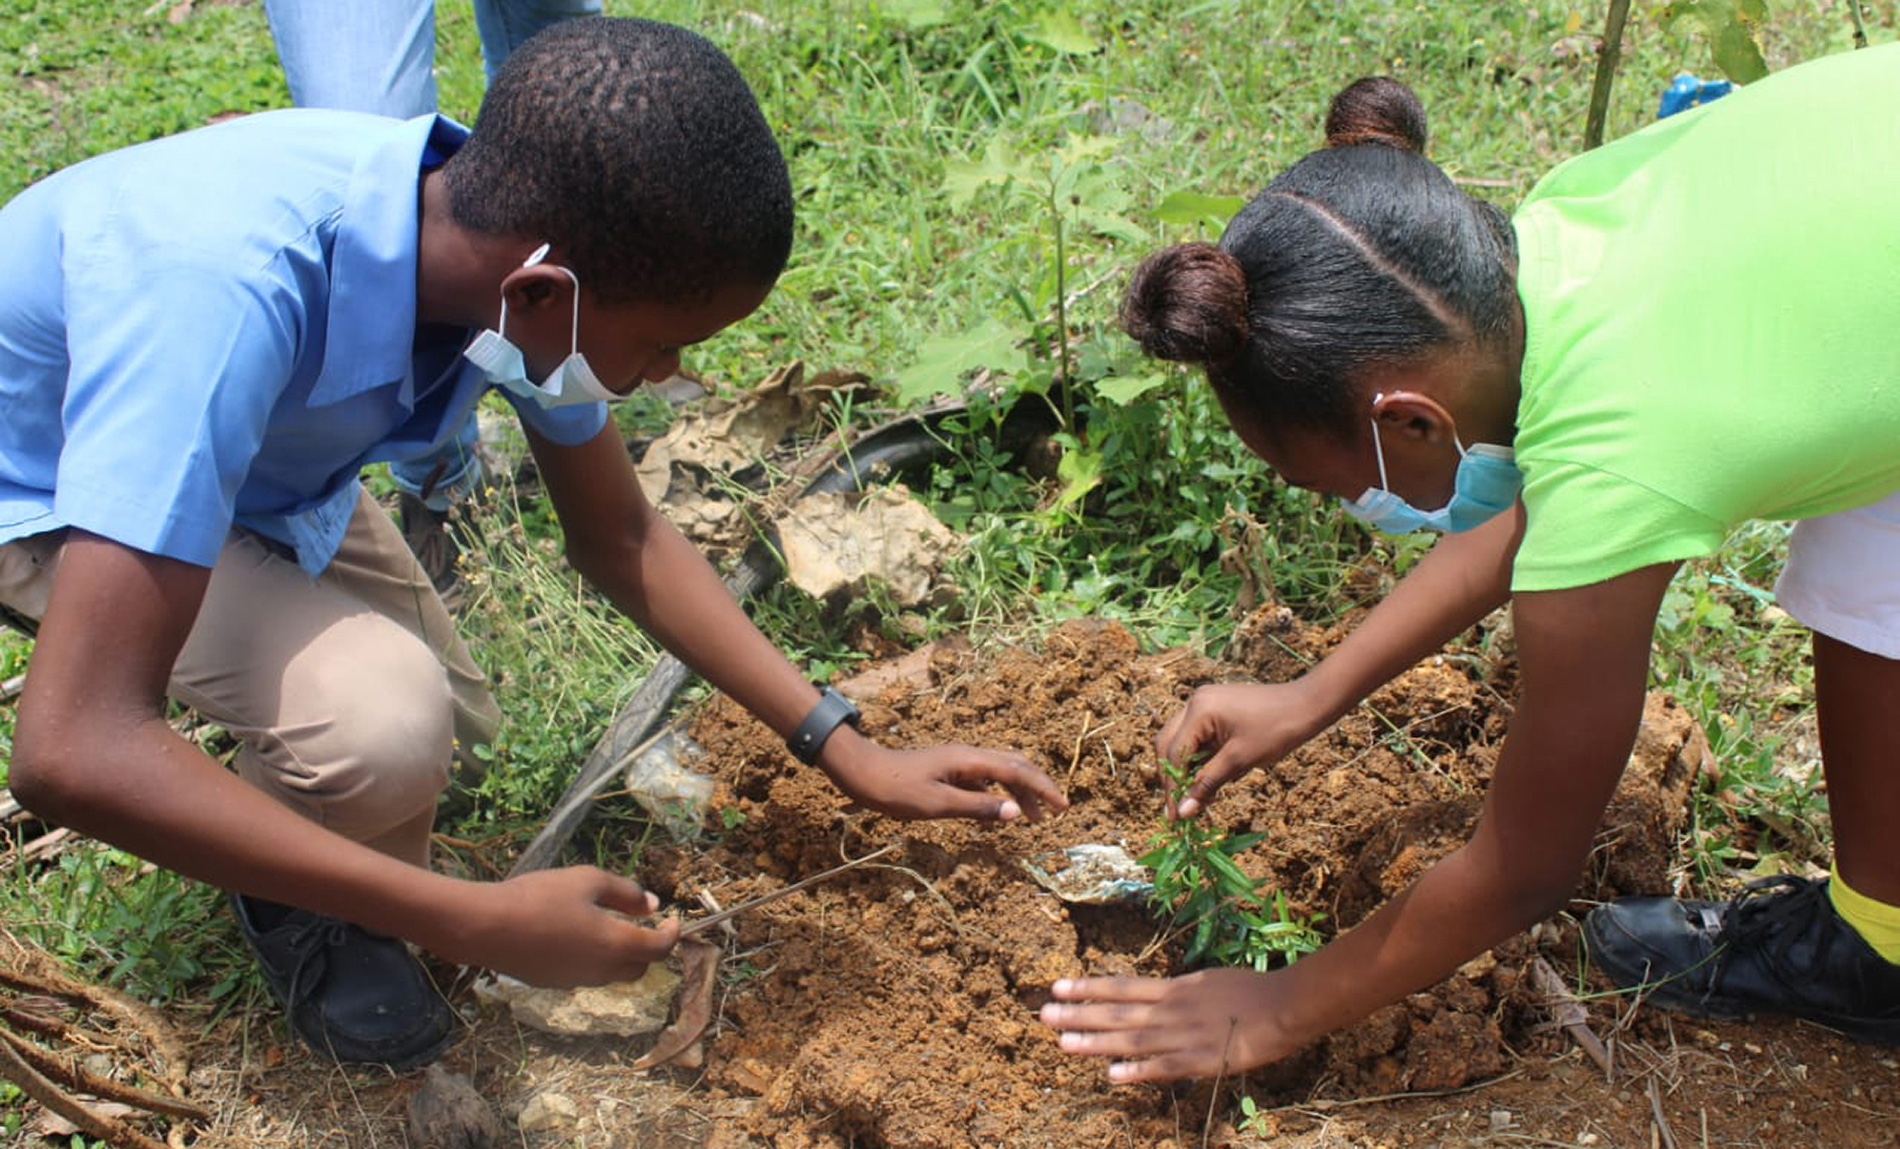 A boy and a girl in Jamaica plant fruit trees.